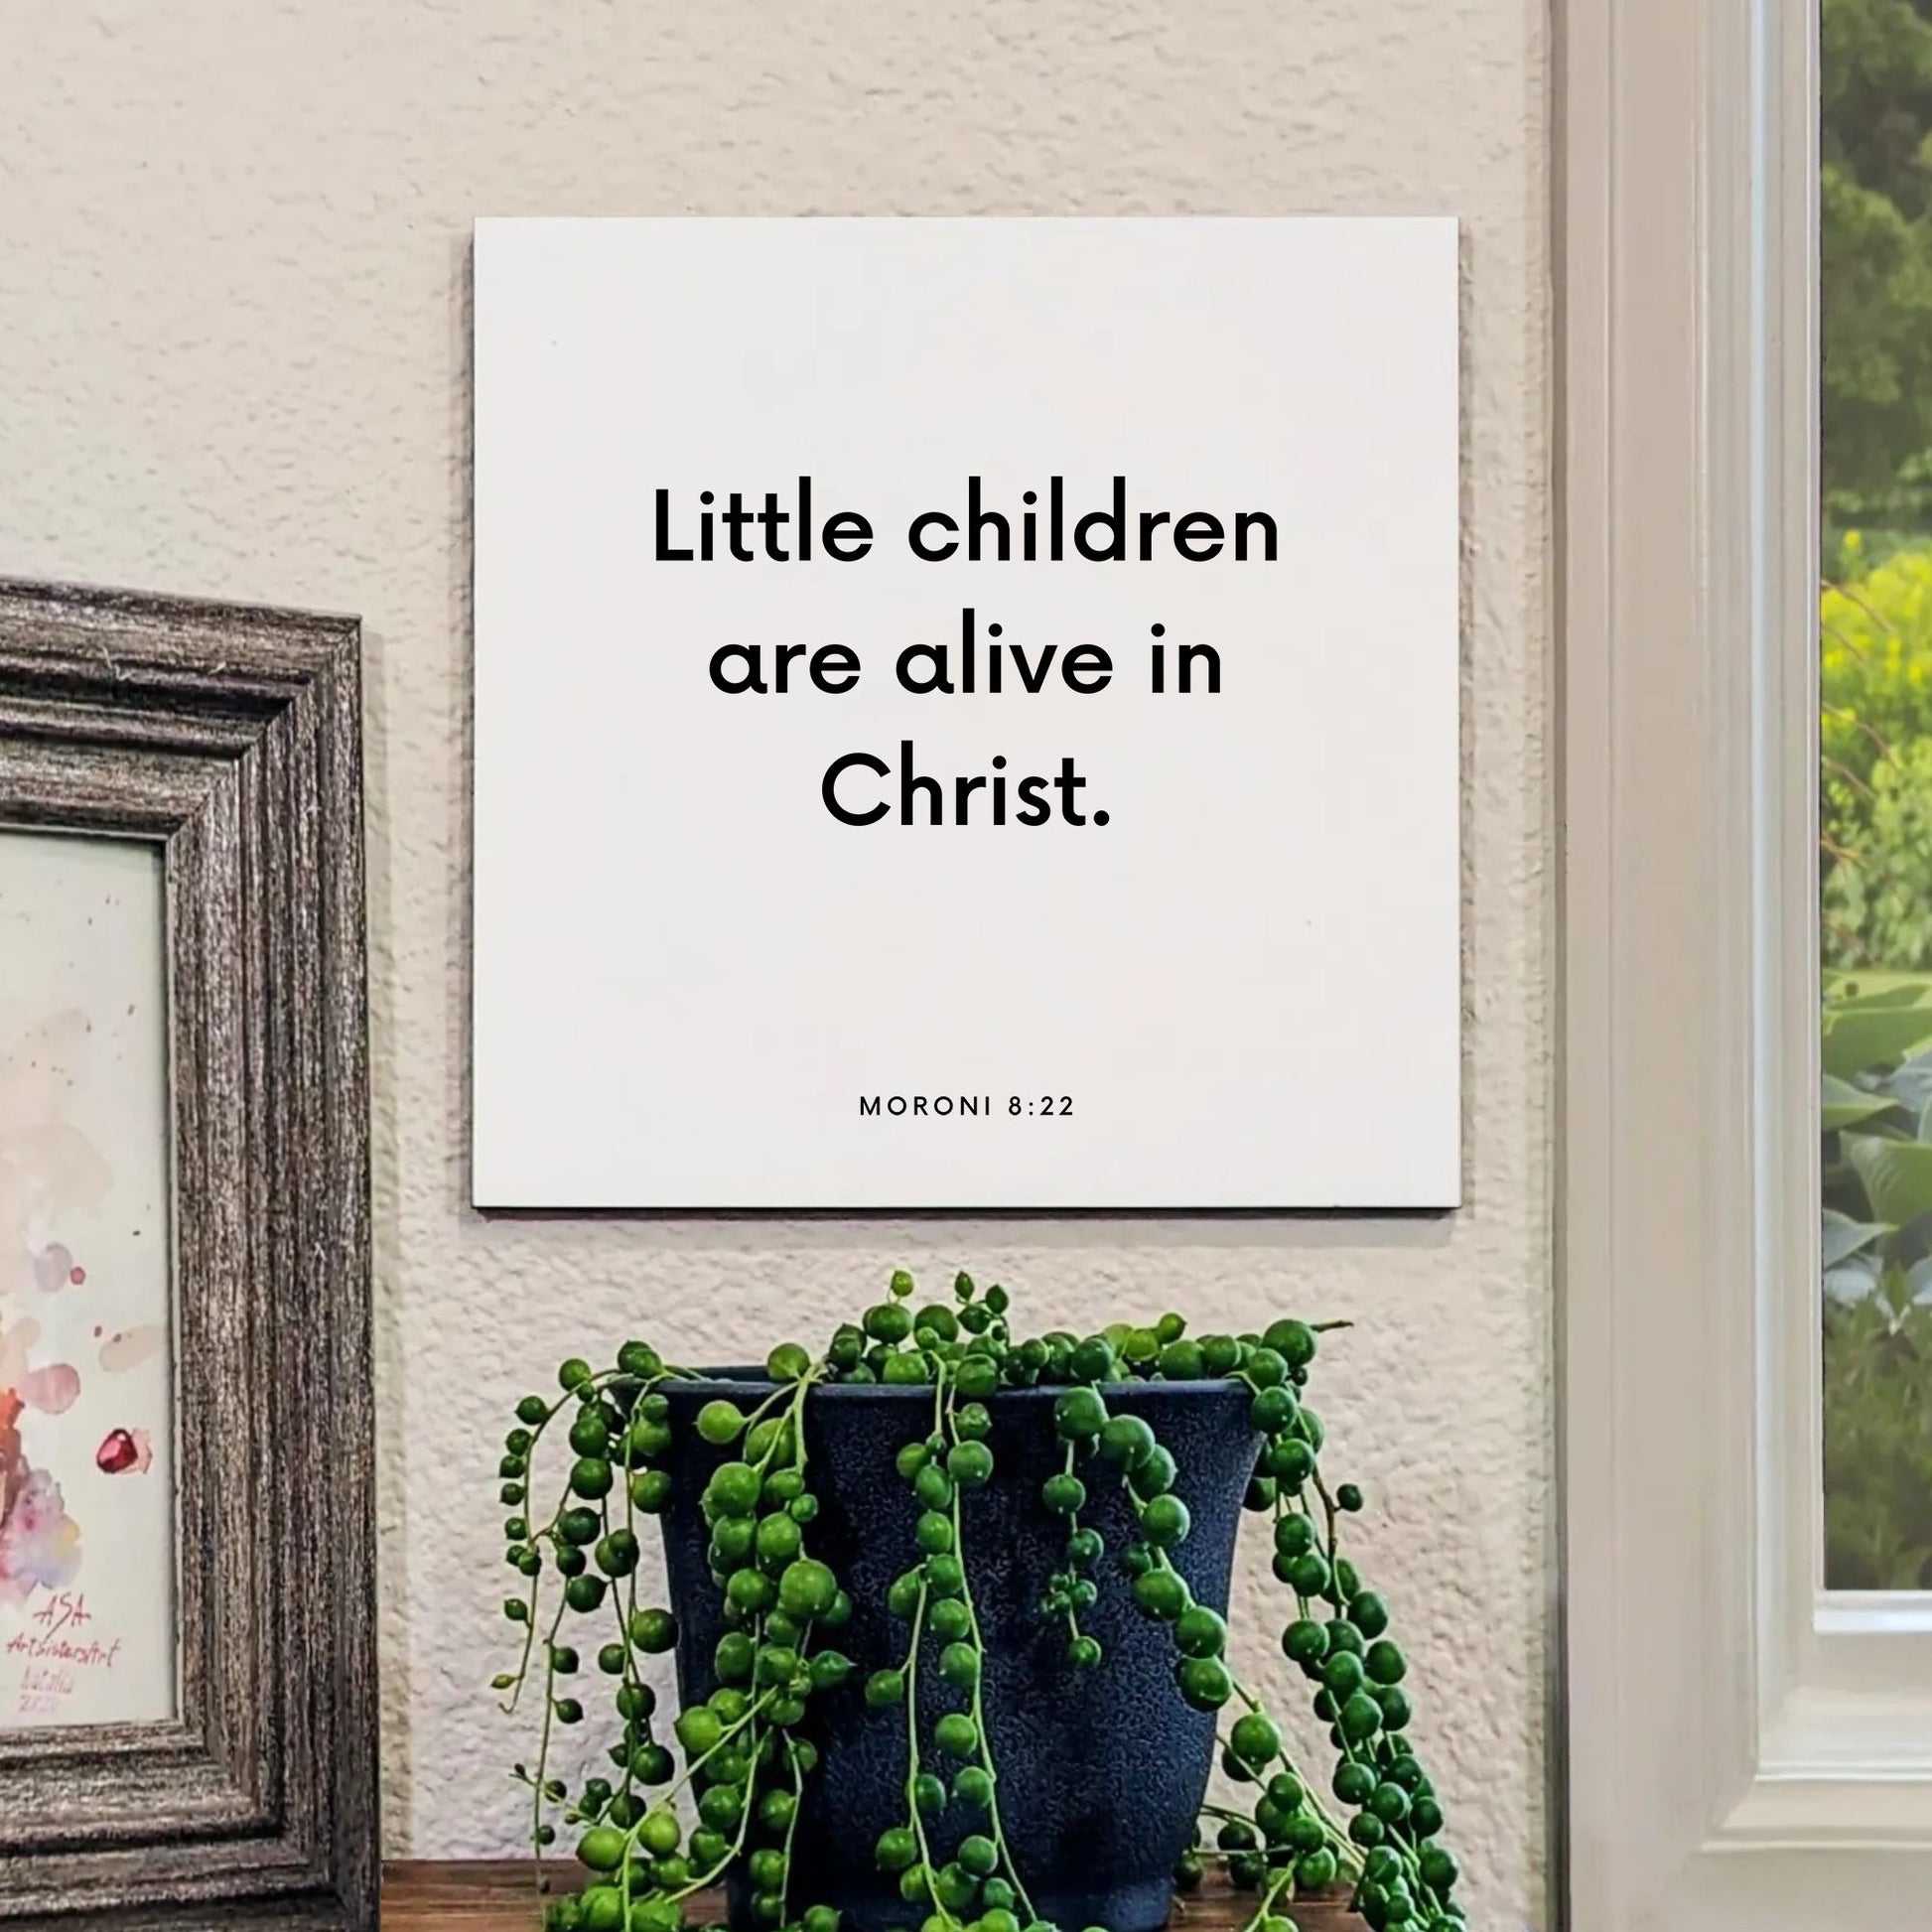 Window mouting of the scripture tile for Moroni 8:22 - "Little children are alive in Christ"